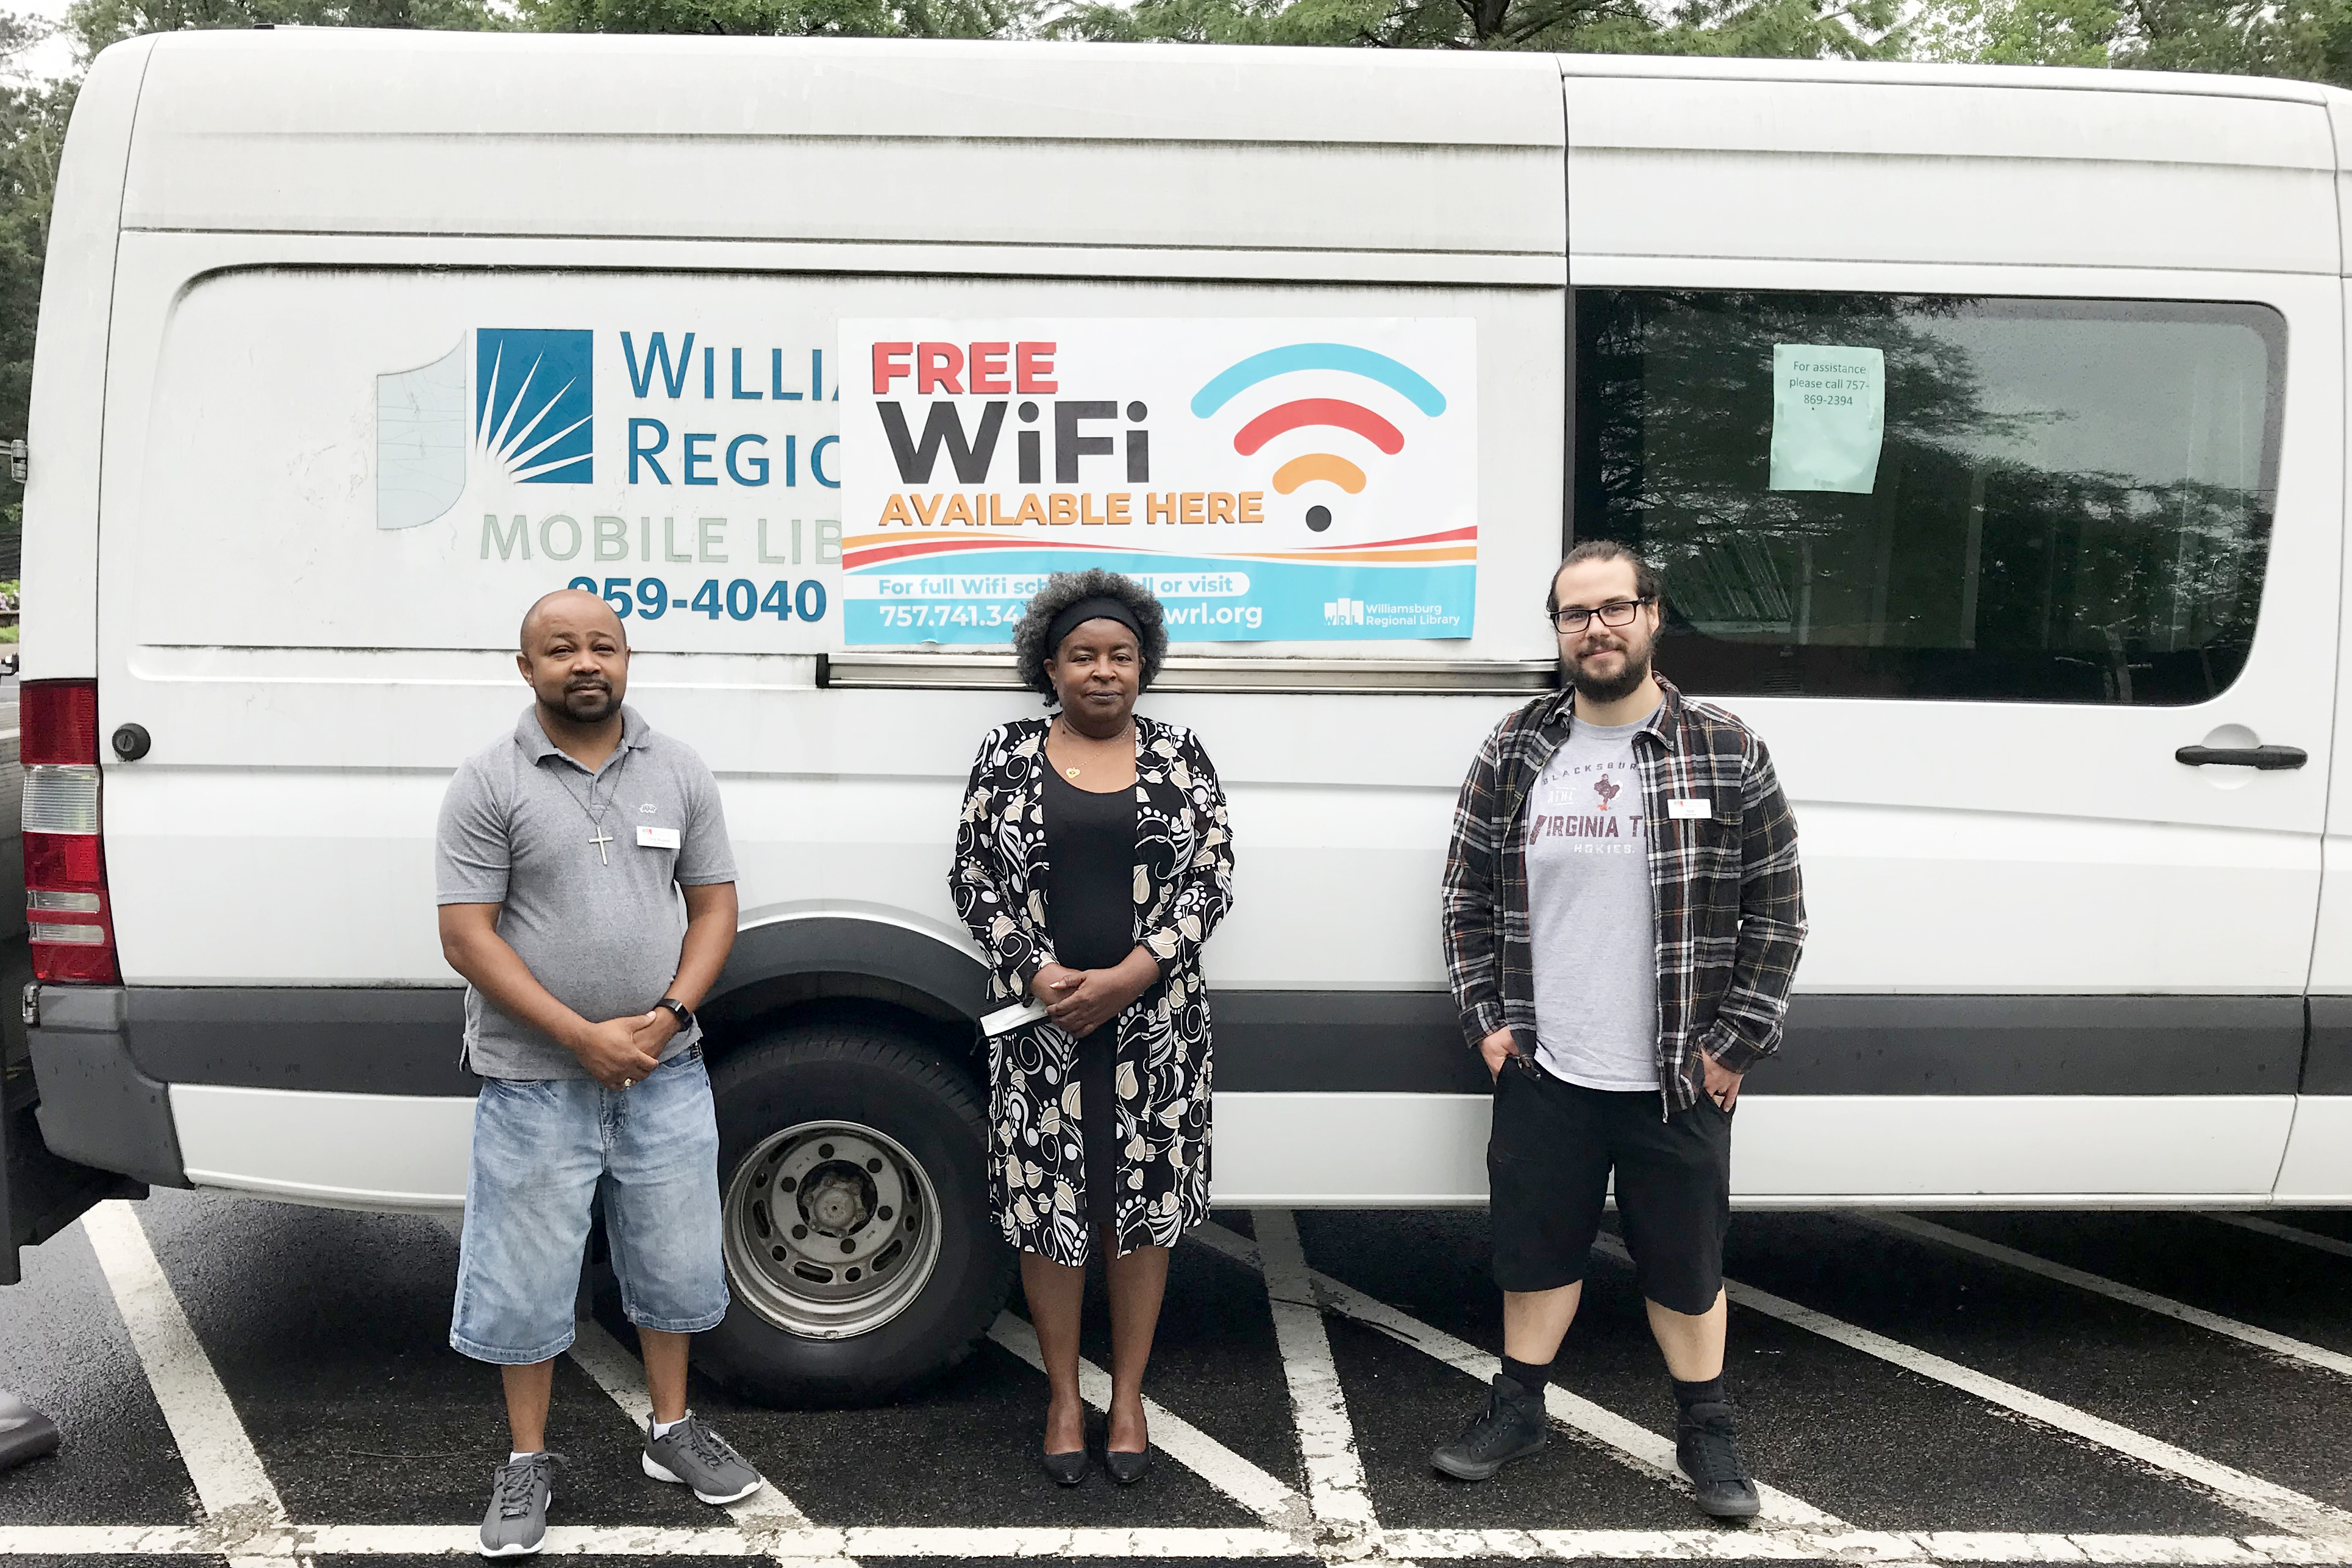 The Mobile Library Services Youth & Neighborhood Team for Williamsburg Regional Library has been chosen for the 2021 Public Library Innovator Award.